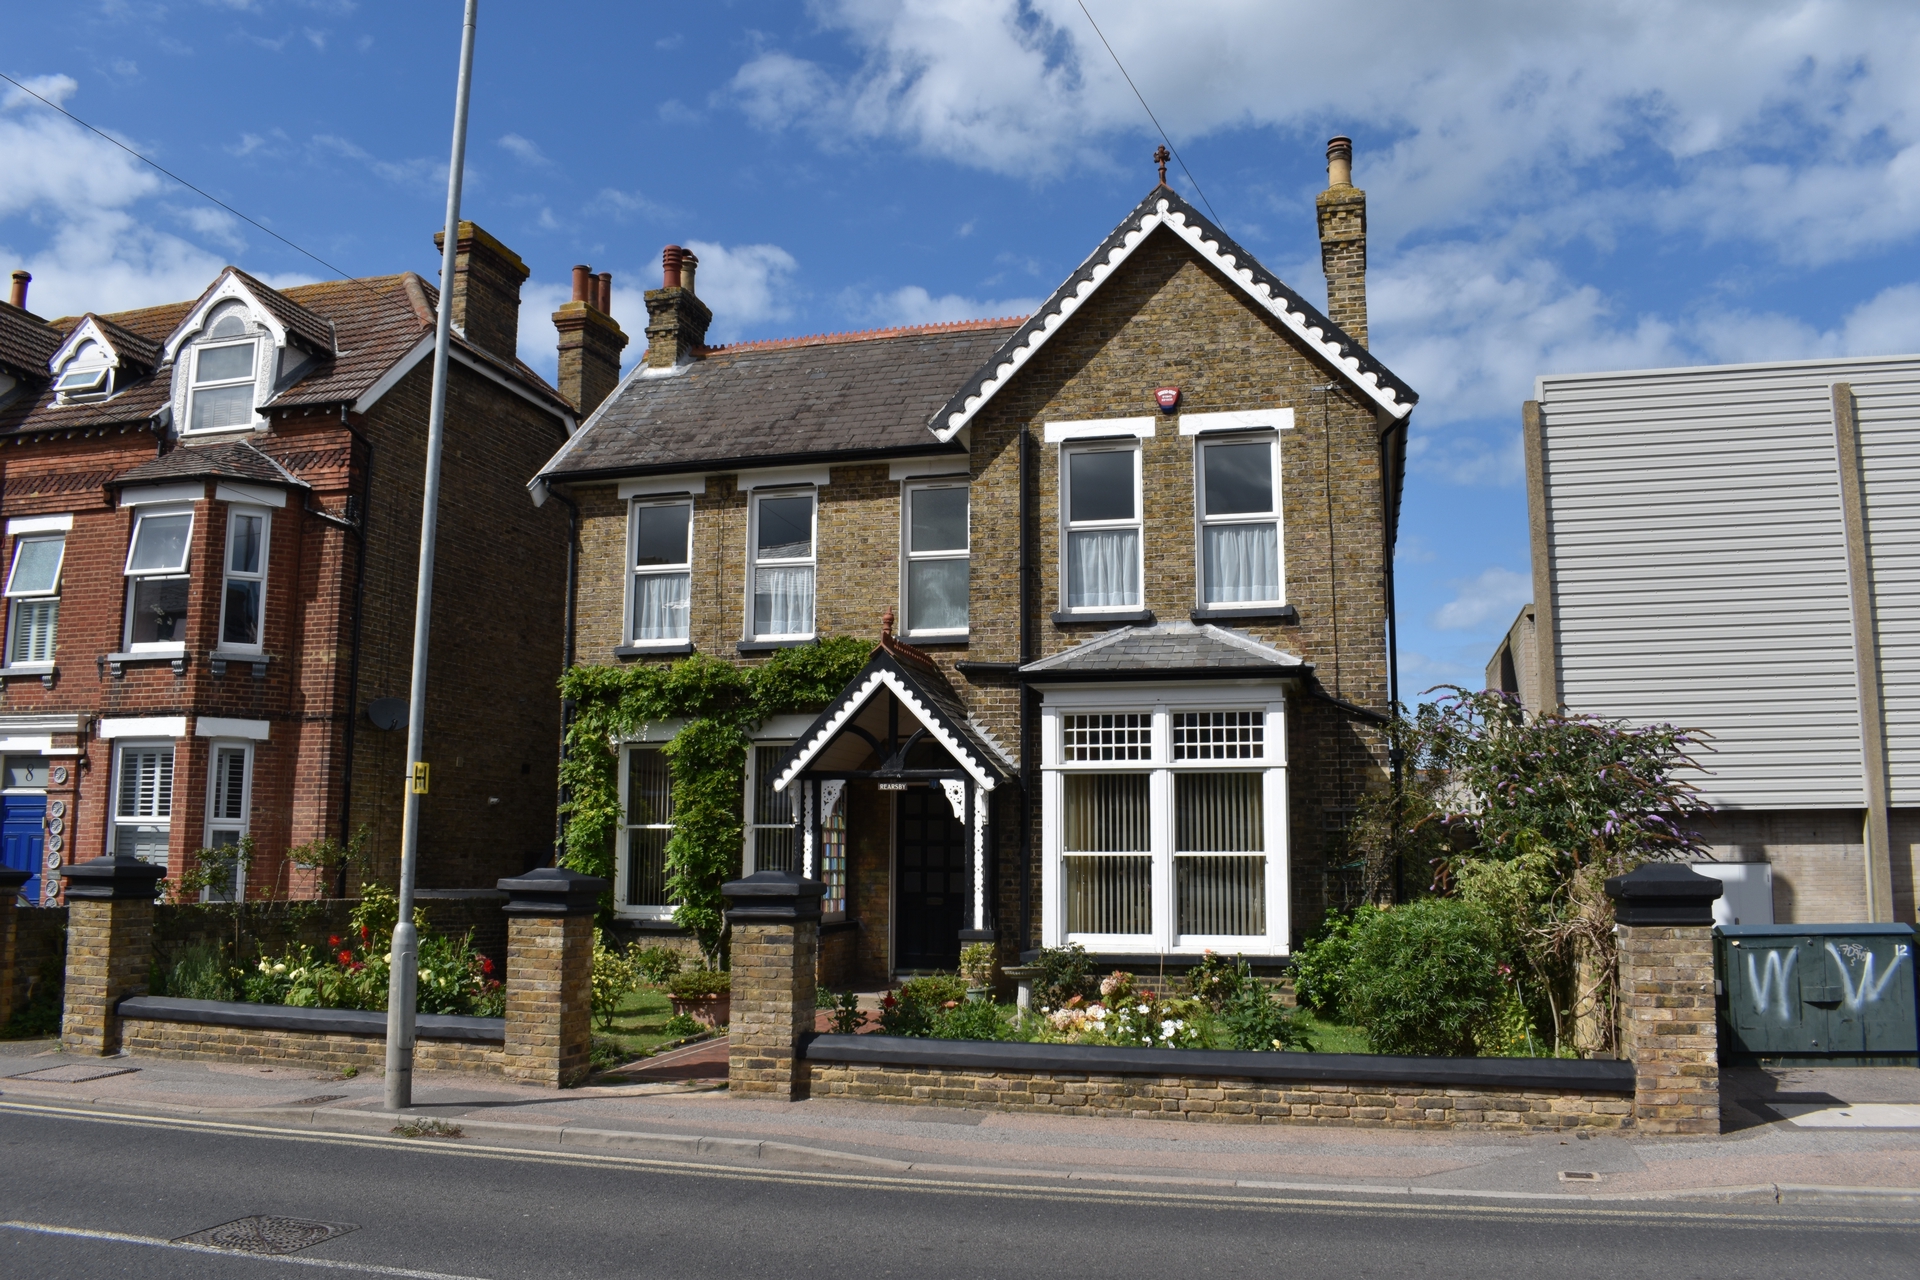 Henderson Setterfield are thrilled to offer this first floor 1 bedroom flat situated close to the centre of Broadstairs. The property comprises large lounge, double bedroom, bathroom with shower over the bath and kitchen, there is off-street parking availiable. 